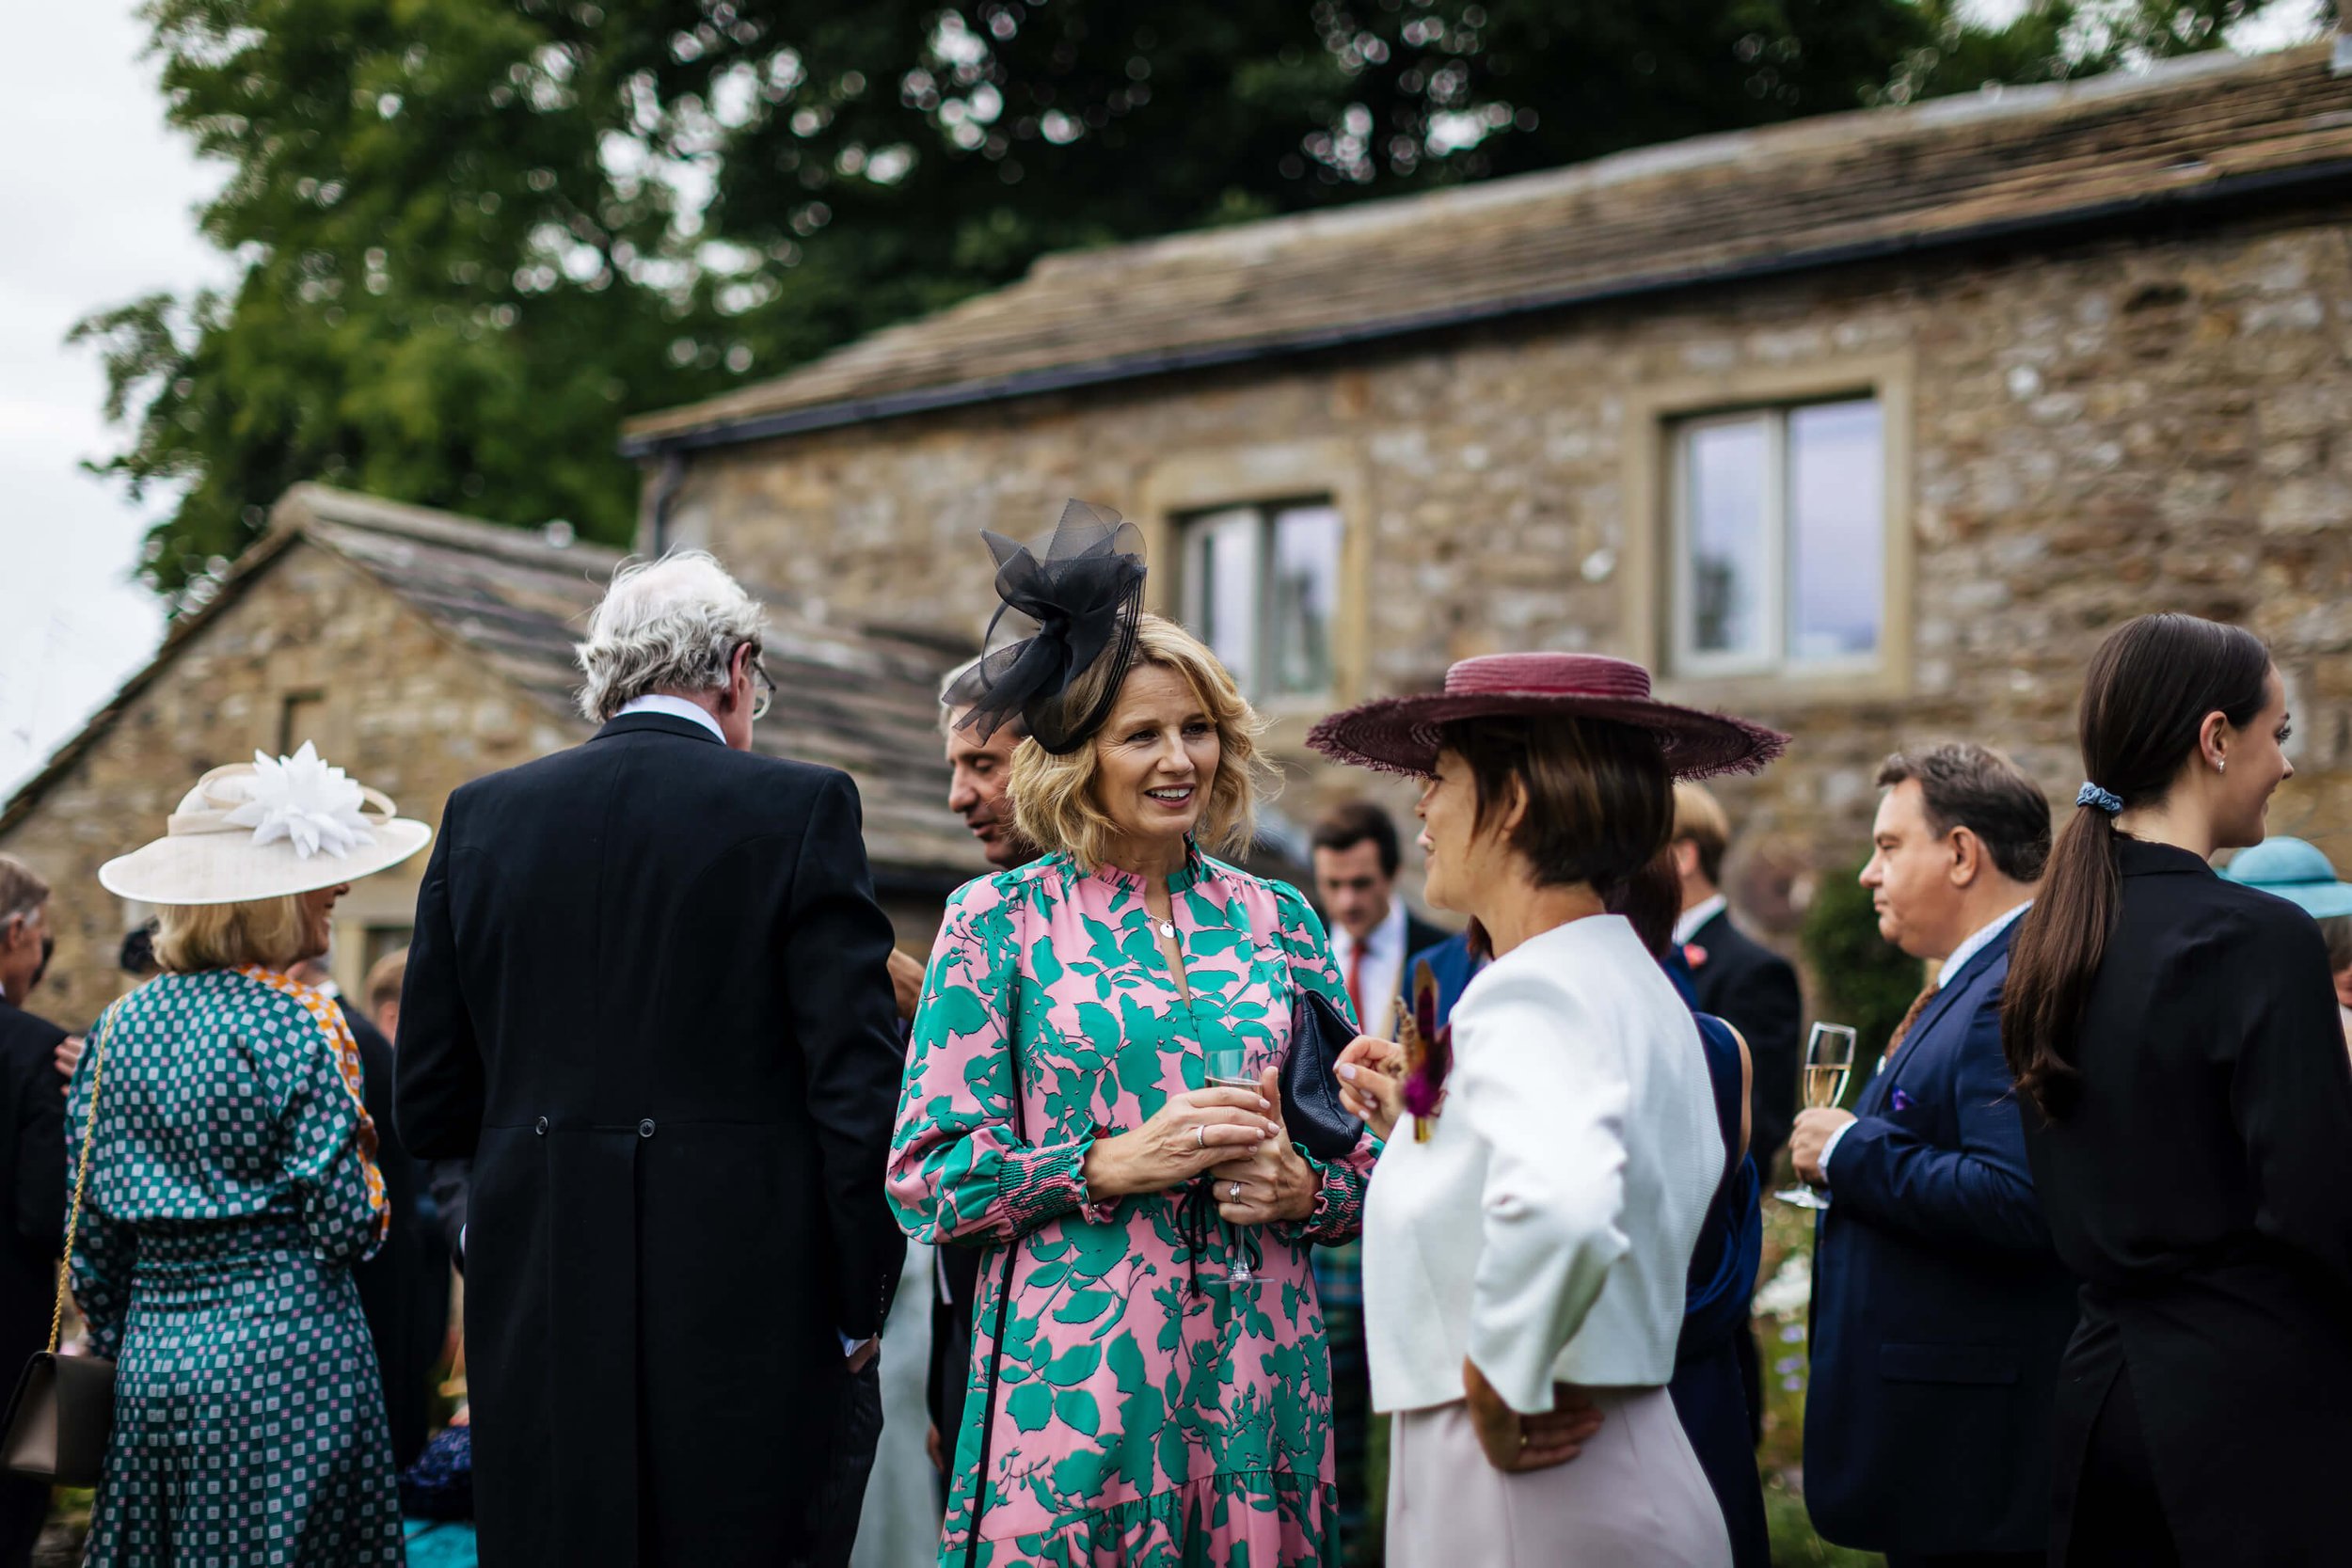 Guests at a wedding in Burnsall